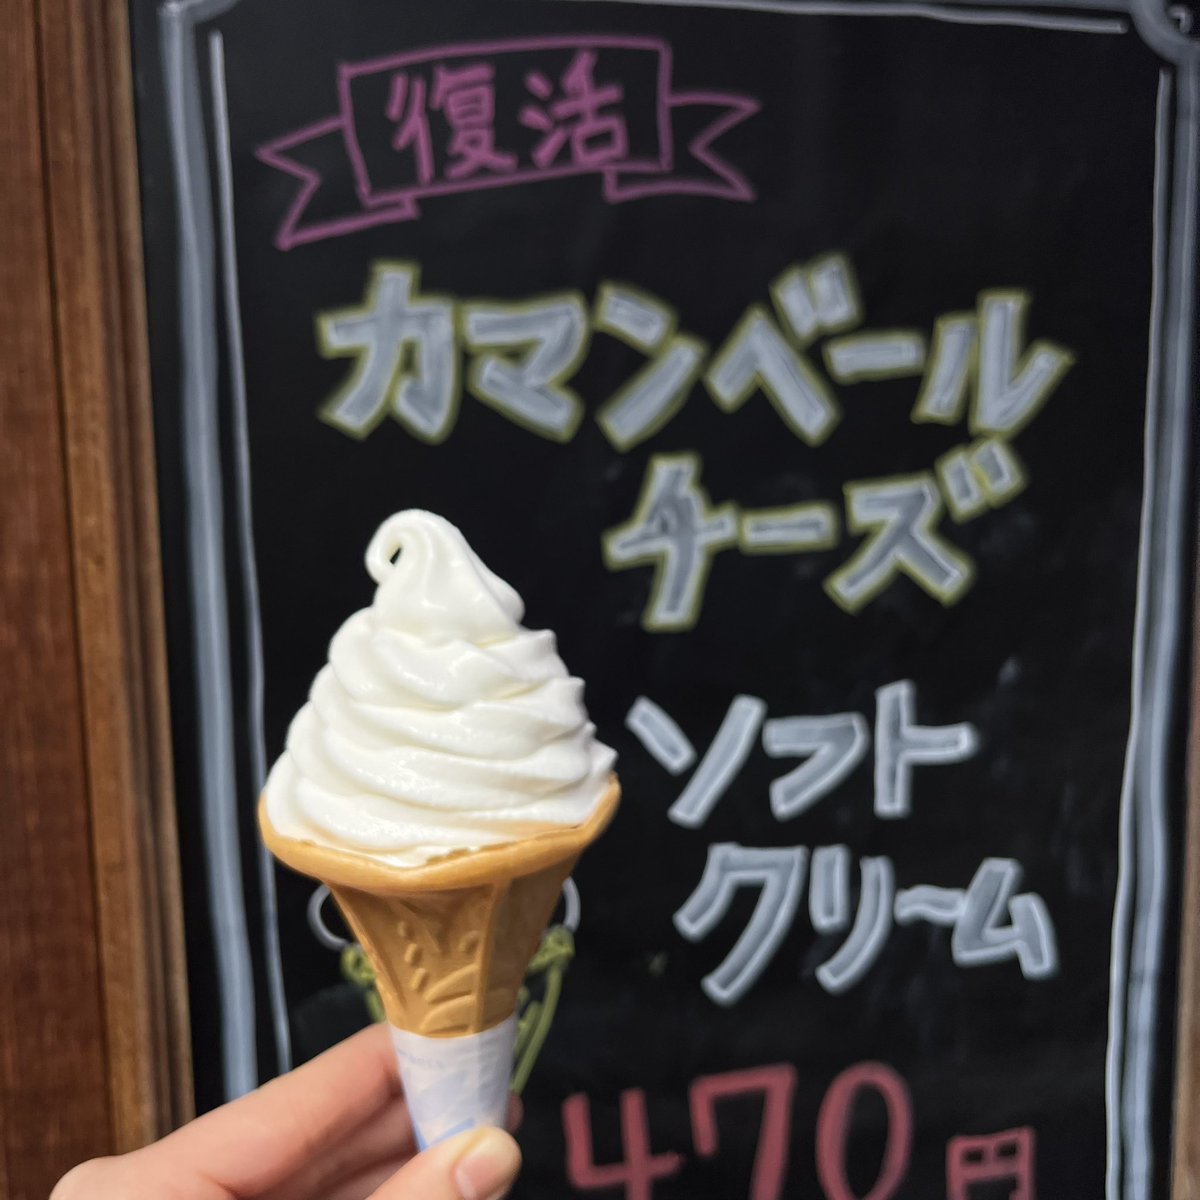 Limited time camembert soft serve ice cream,